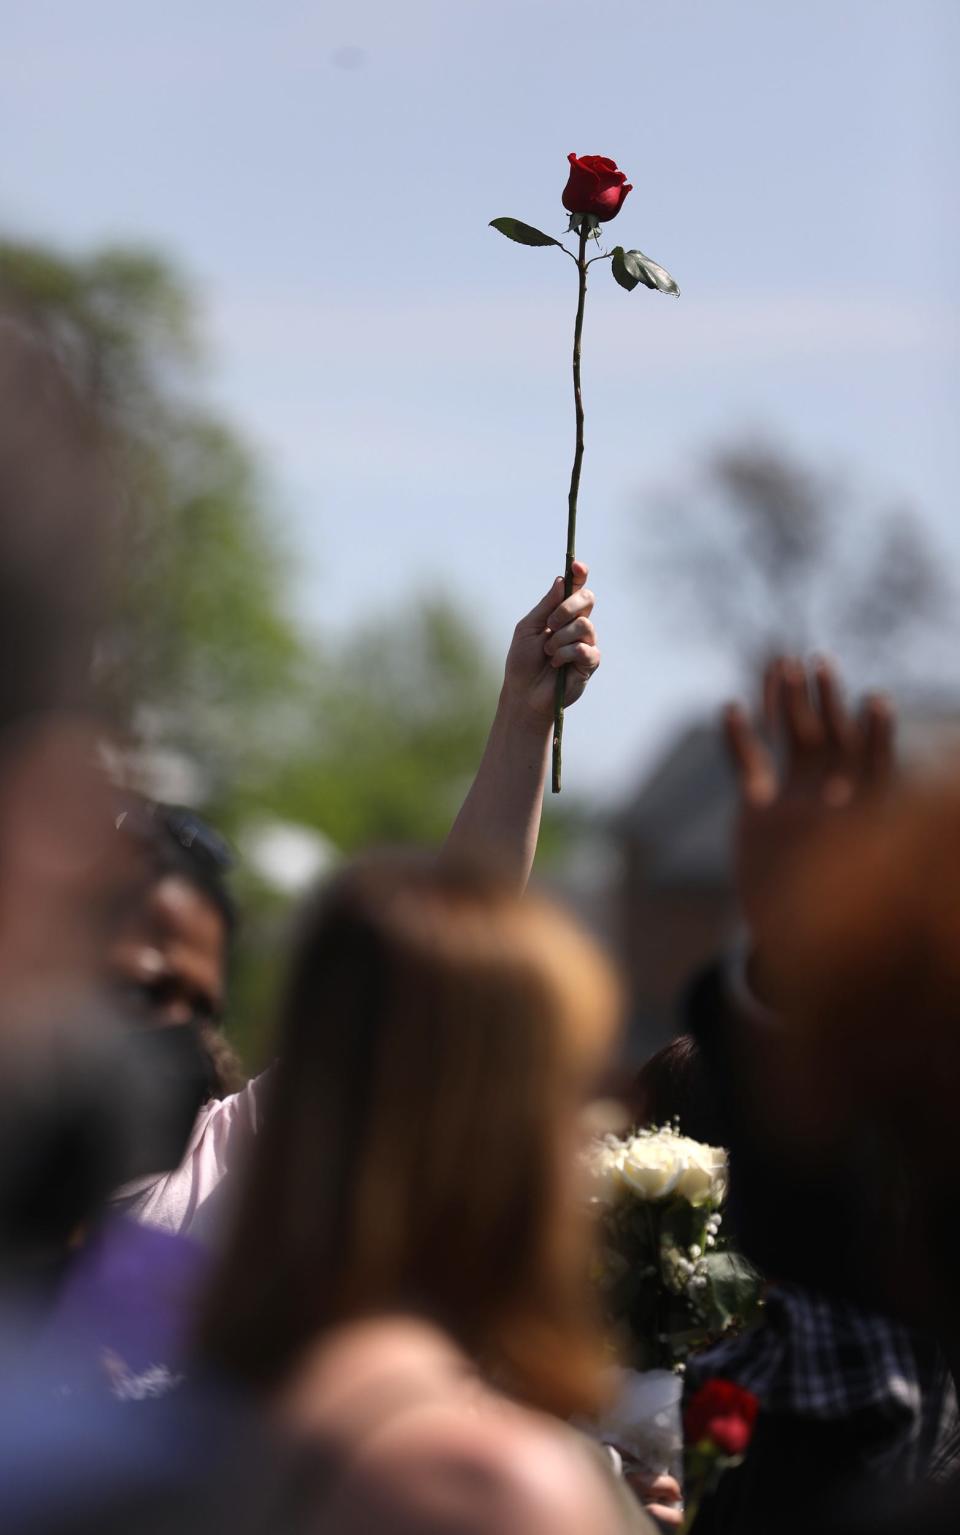 Family and community members marched around the neighborhood, holding up roses as they marched.  The group prayed in the street in front of the Tops Friendly Market on Jefferson Ave., in Buffalo, NY on May 15, 2022. Ten people were killed and three others injured in a shooting at the Buffalo grocery store on May 14, 2022.